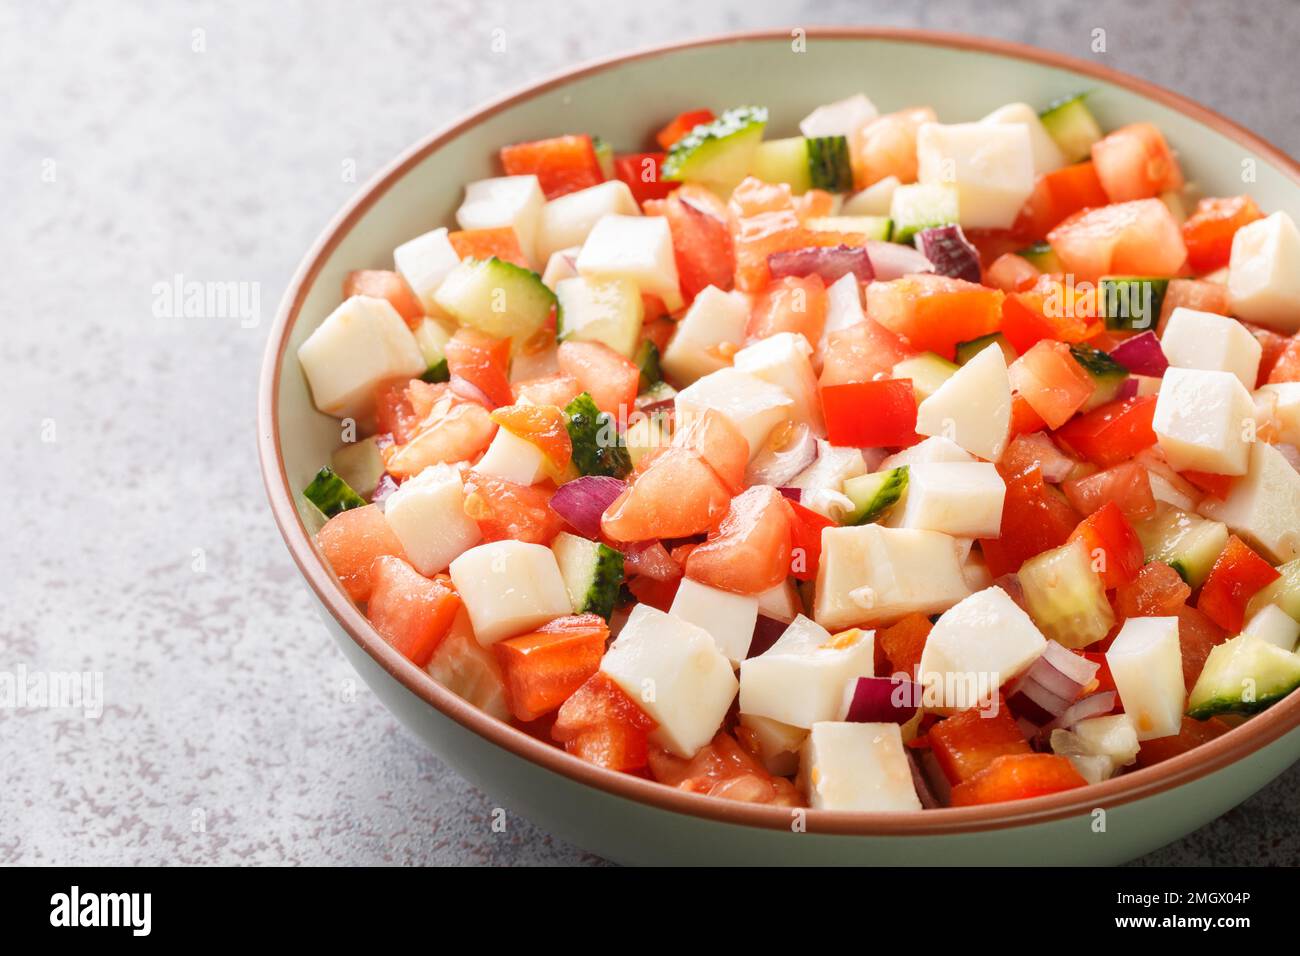 Bahamian conch salad is a vibrant and crunchy salad made using raw pound conch meat and vegetables closeup on the plate on the table. Horizontal Stock Photo